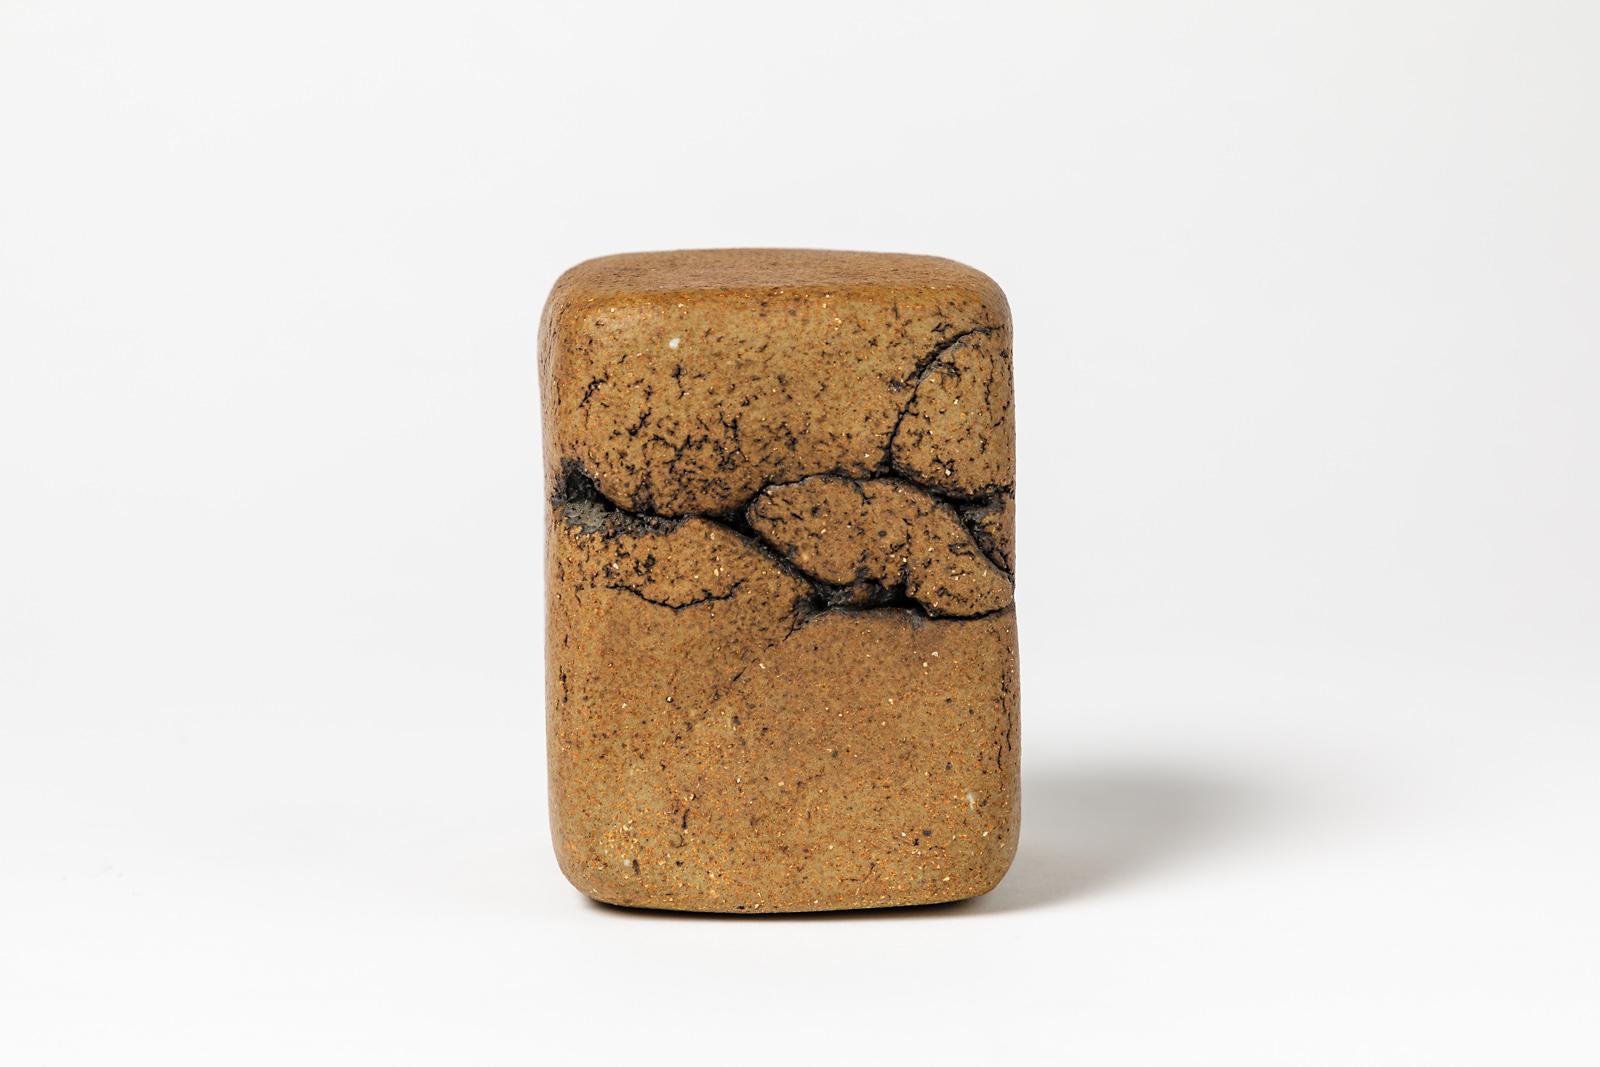 Olivier Giroud

Realized in 1977, signed under the base.

Abstract stoneware ceramic sculpture.

Original midcentury design form with brown stoneware ceramic color

Perfect condition

Measures: Height 10cm, large 8cm.